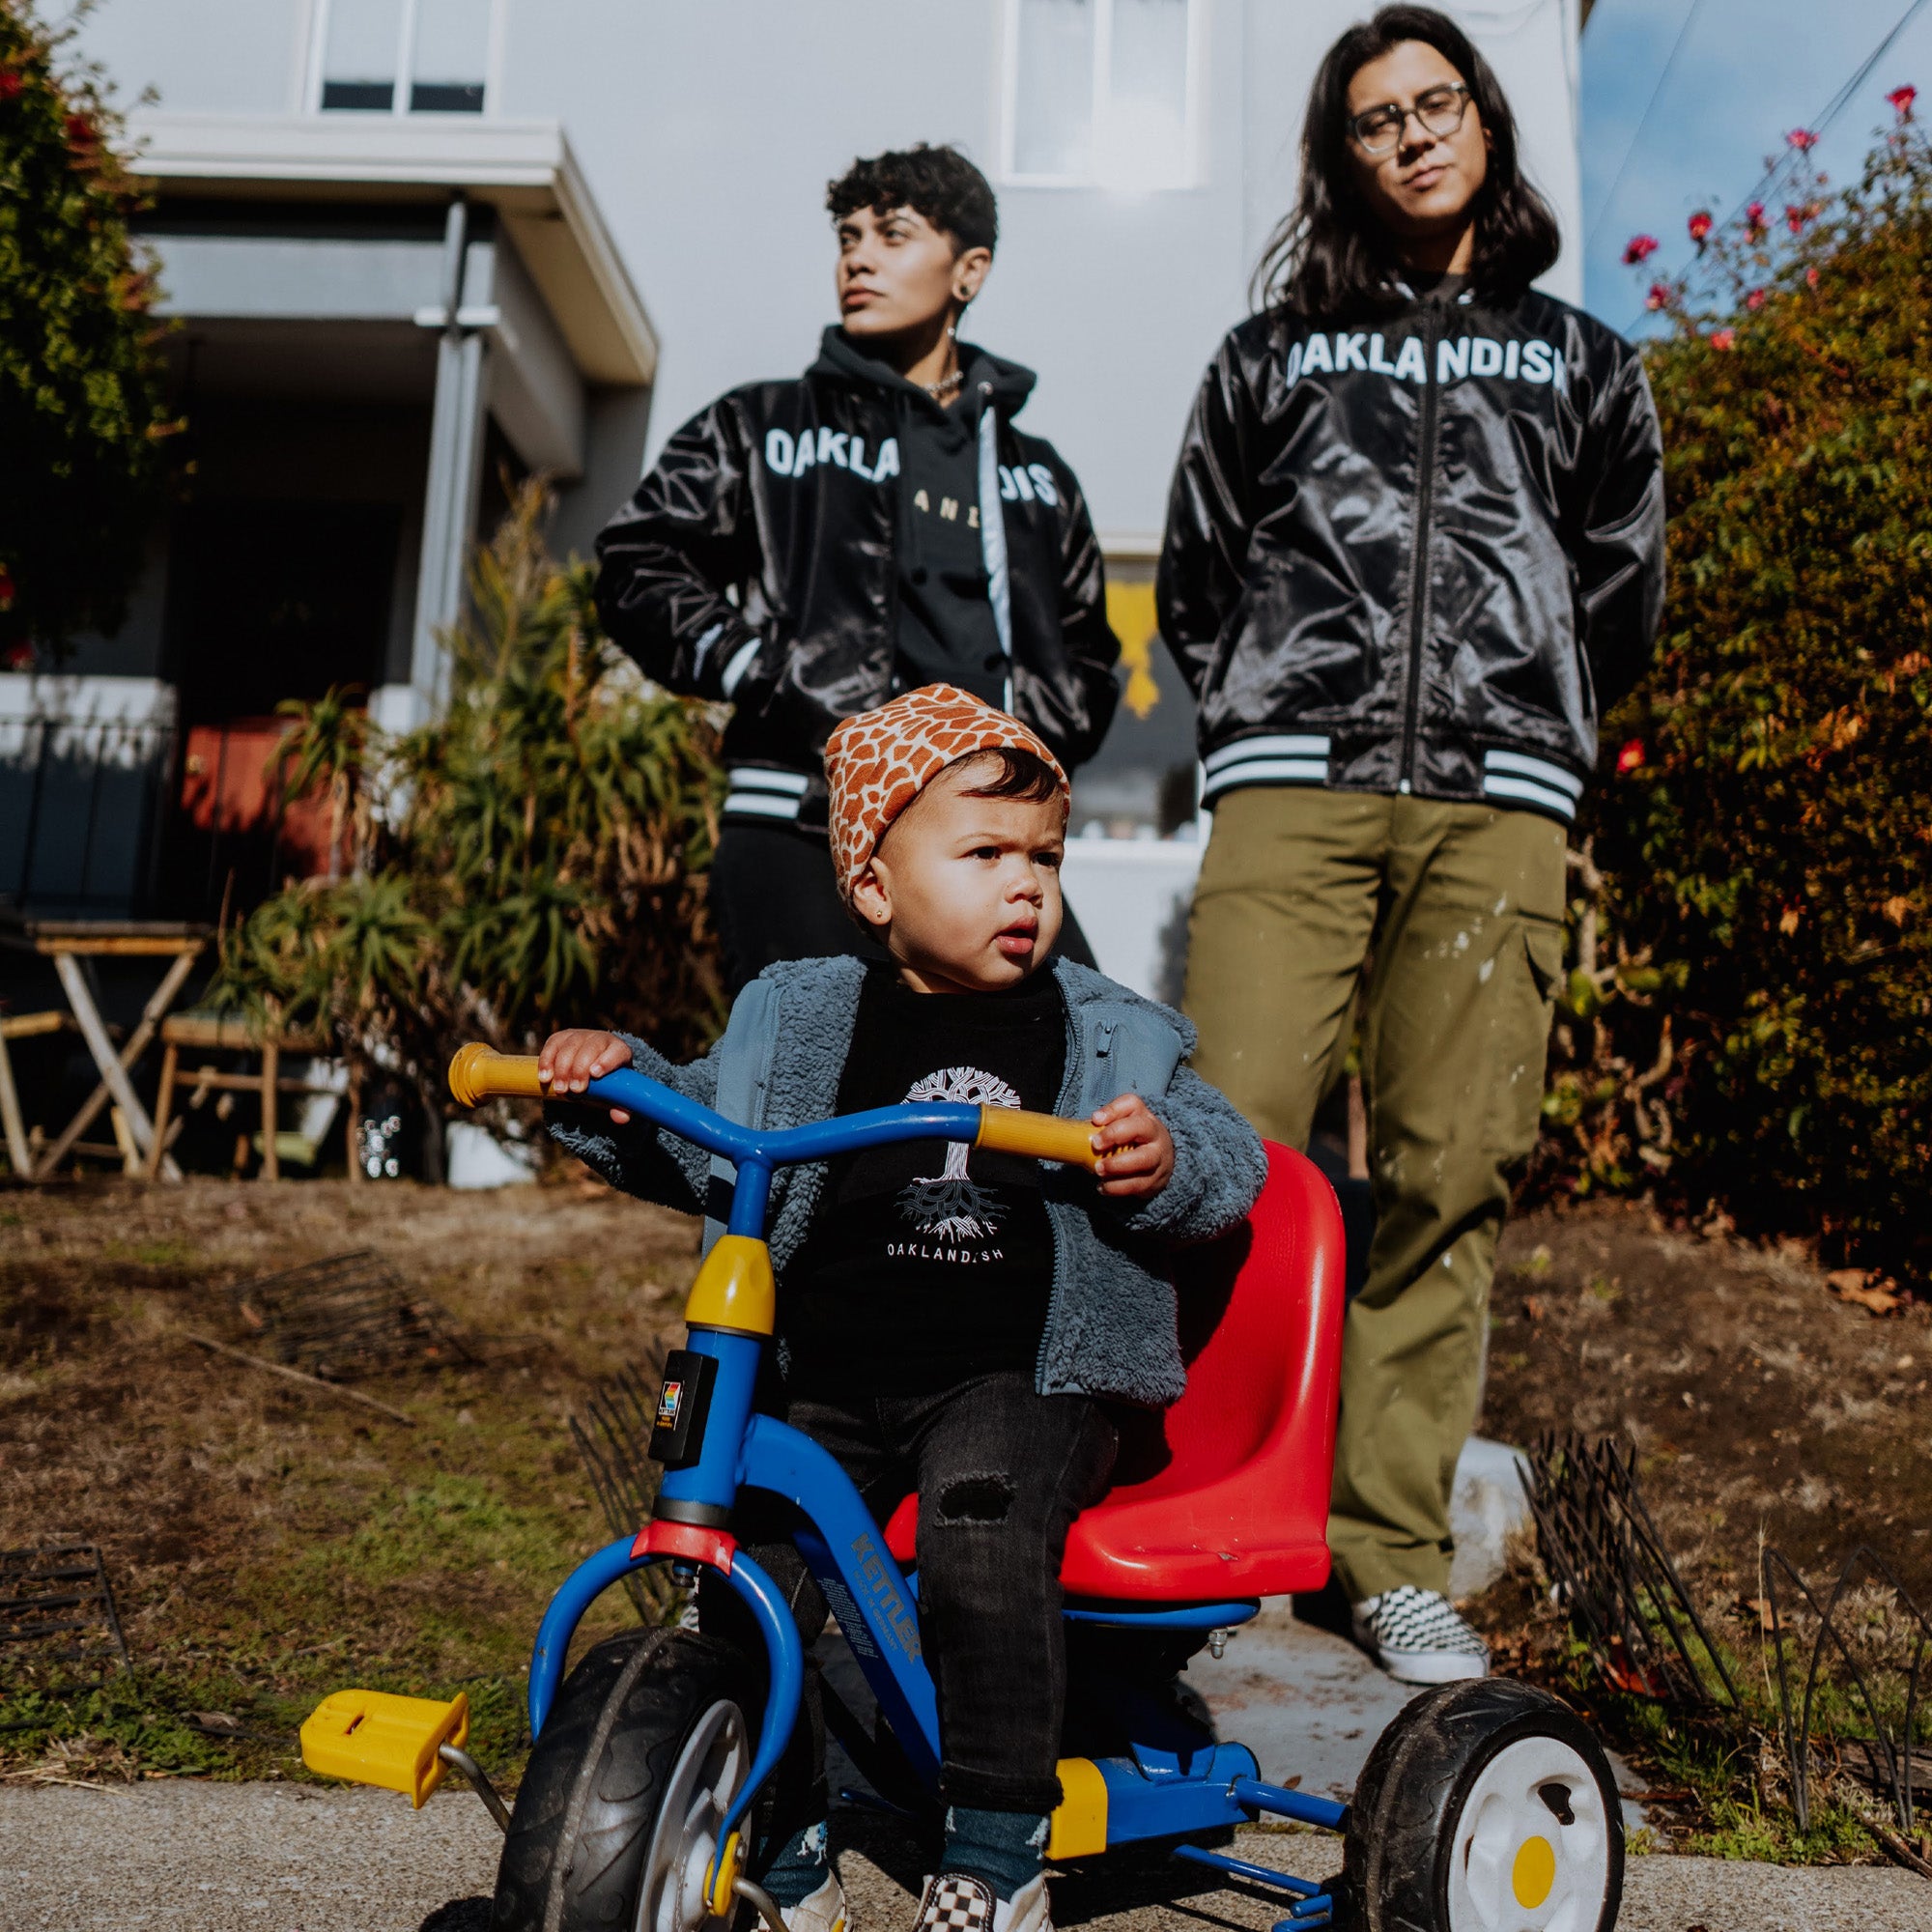 Male and female model outdoors wearing black side of satin jacket imprinted with an aerial map of Oakland with black ribbing at collar, cuff, and waistband with toddler at center in Oaklandish classic tee.